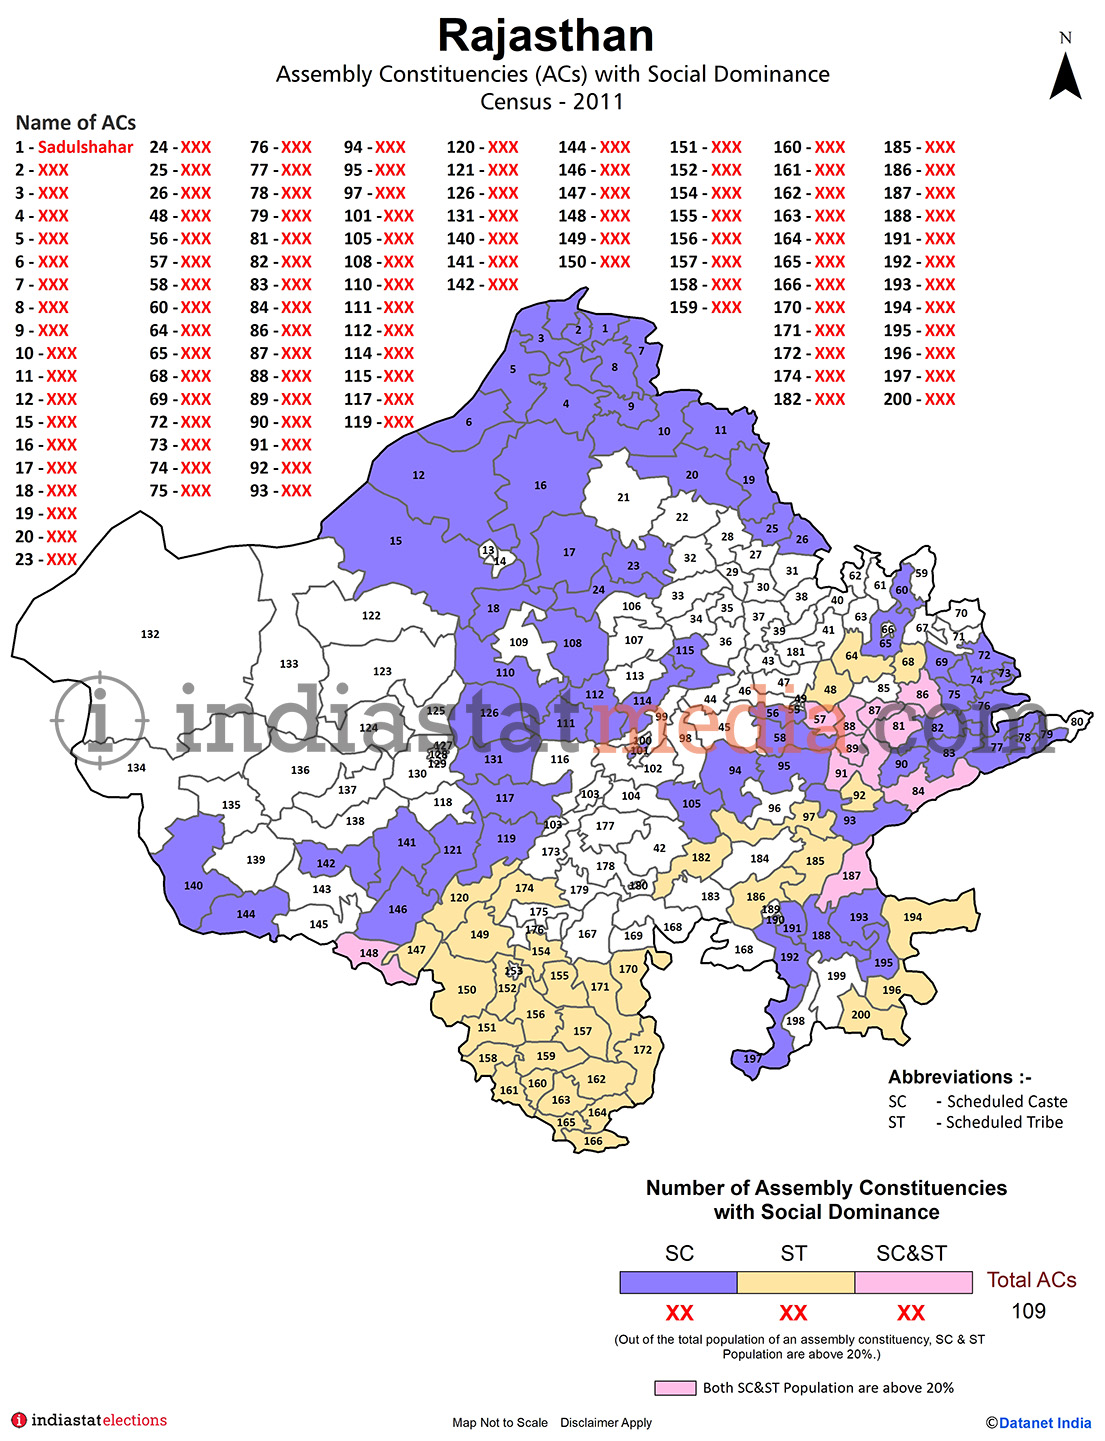 Assembly Constituencies with Social Dominance in Rajasthan - Census 2011